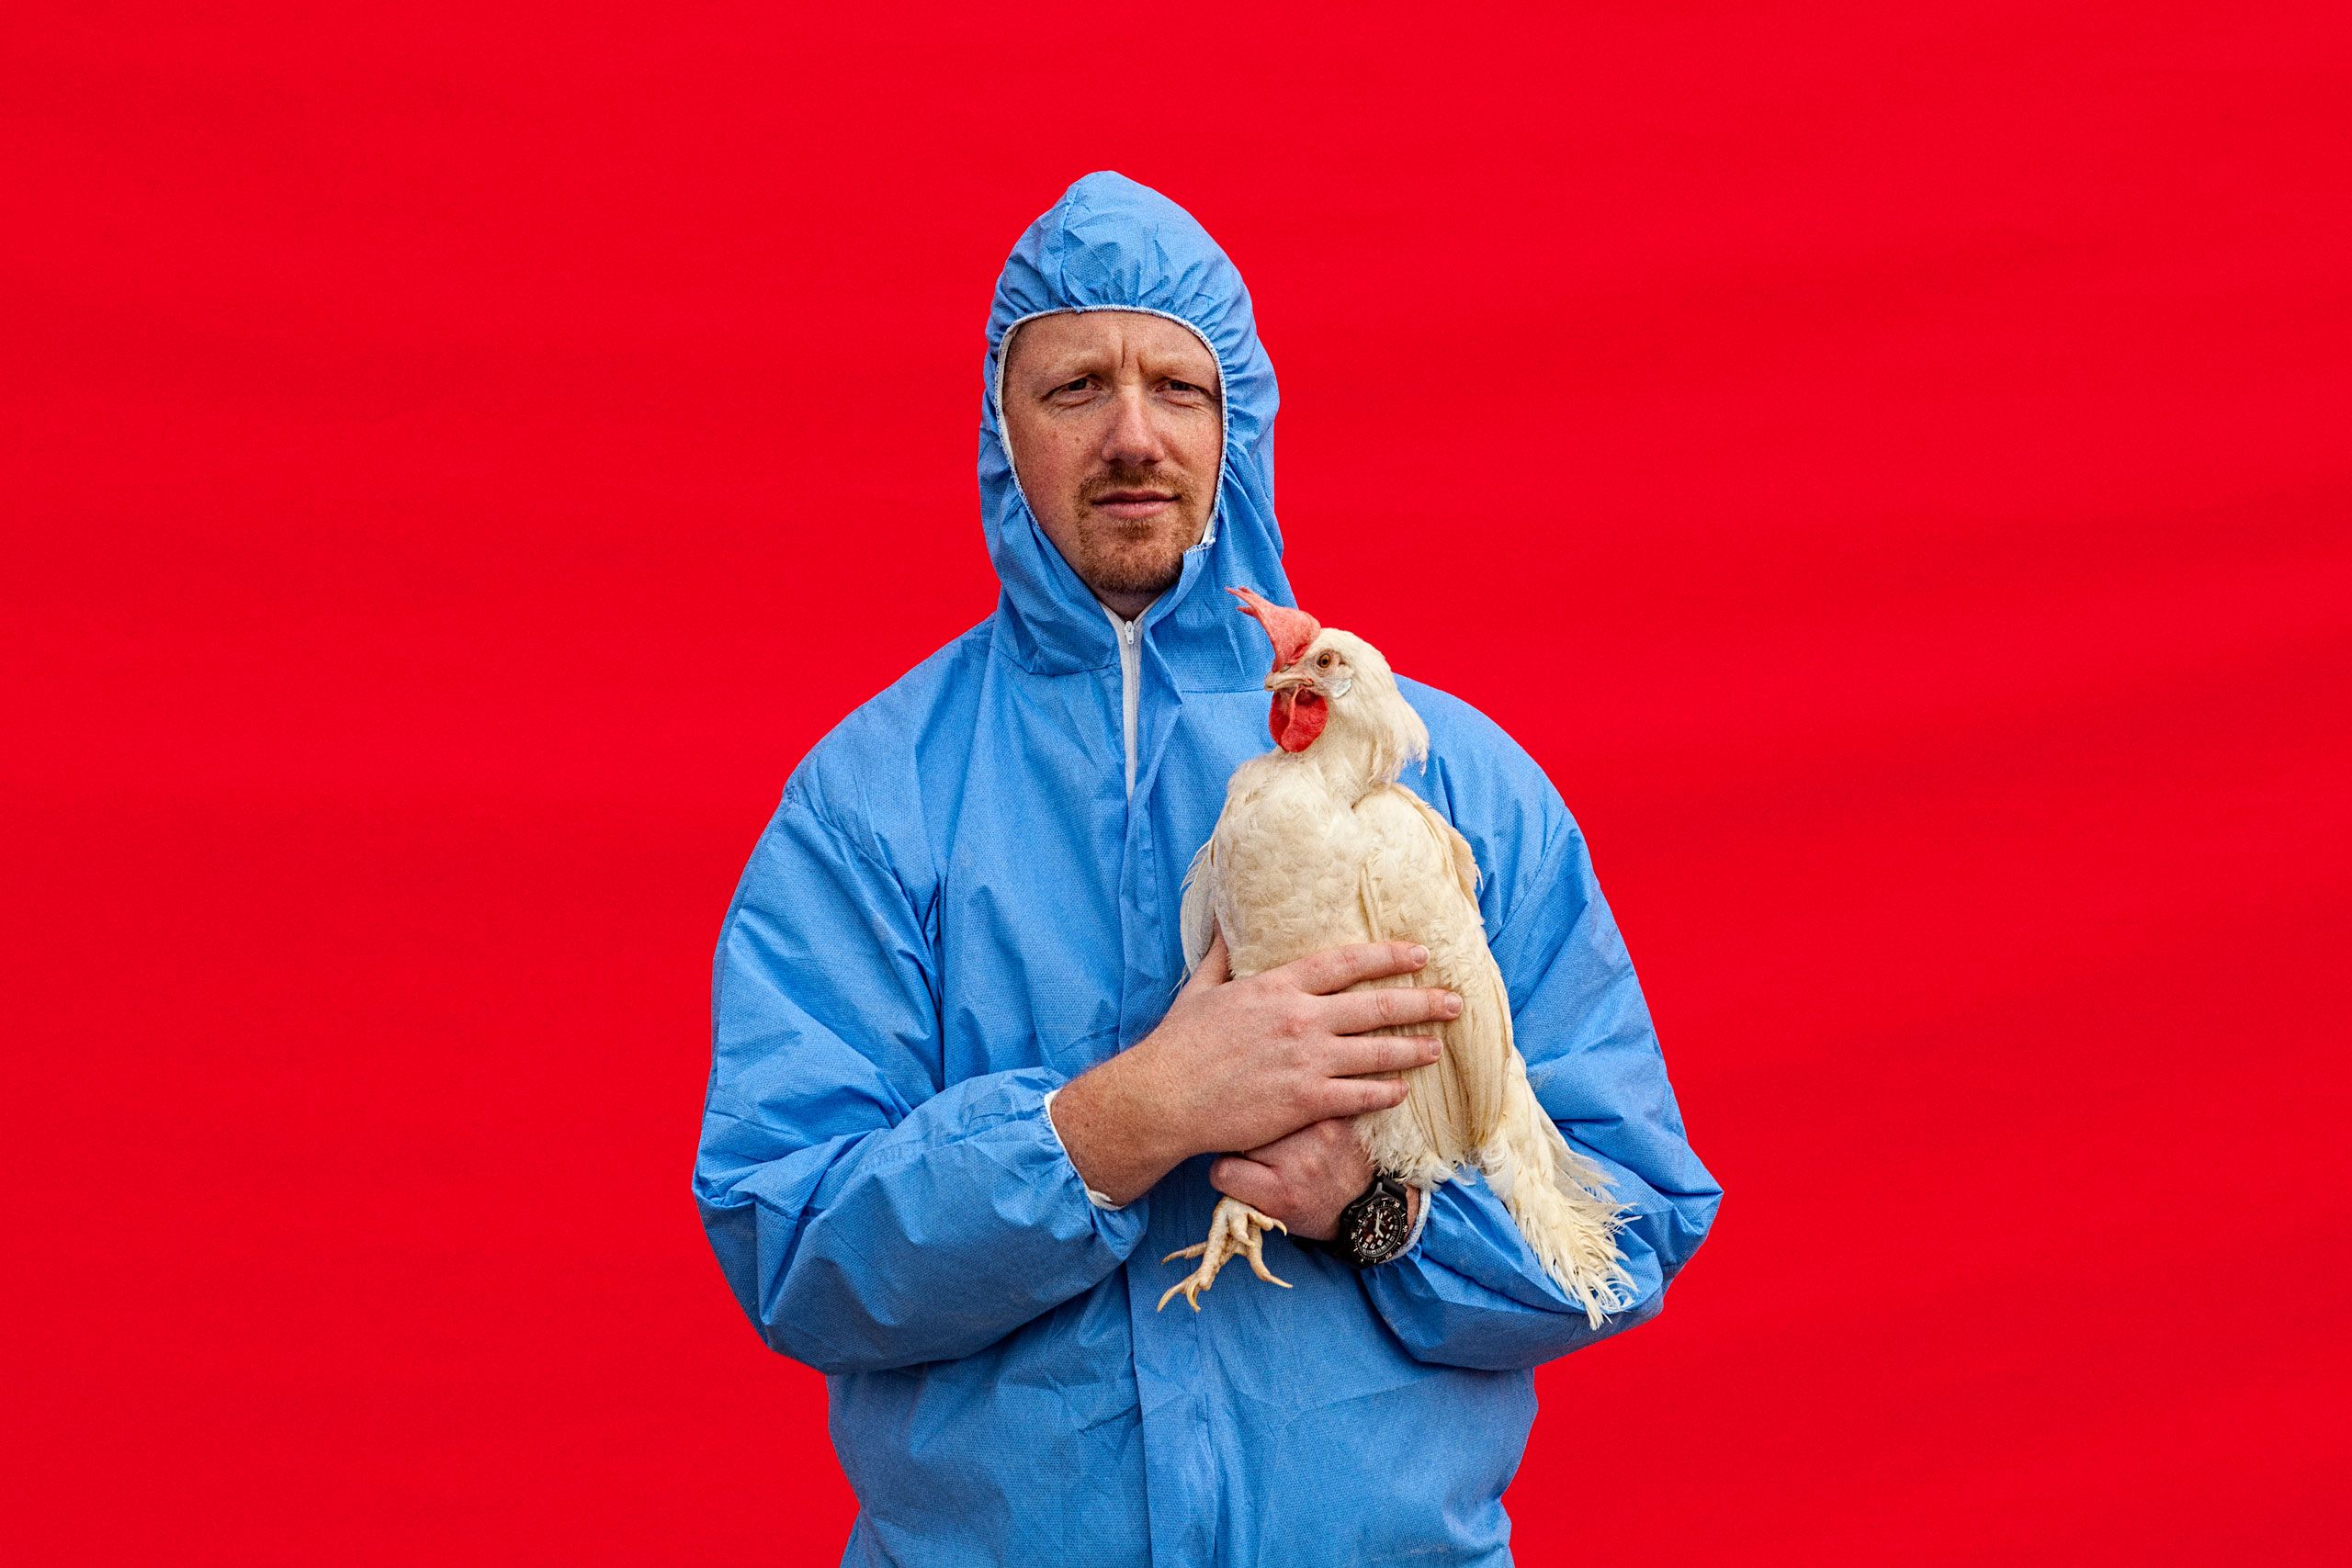 Man Holding Chicken Against Red Backdrop